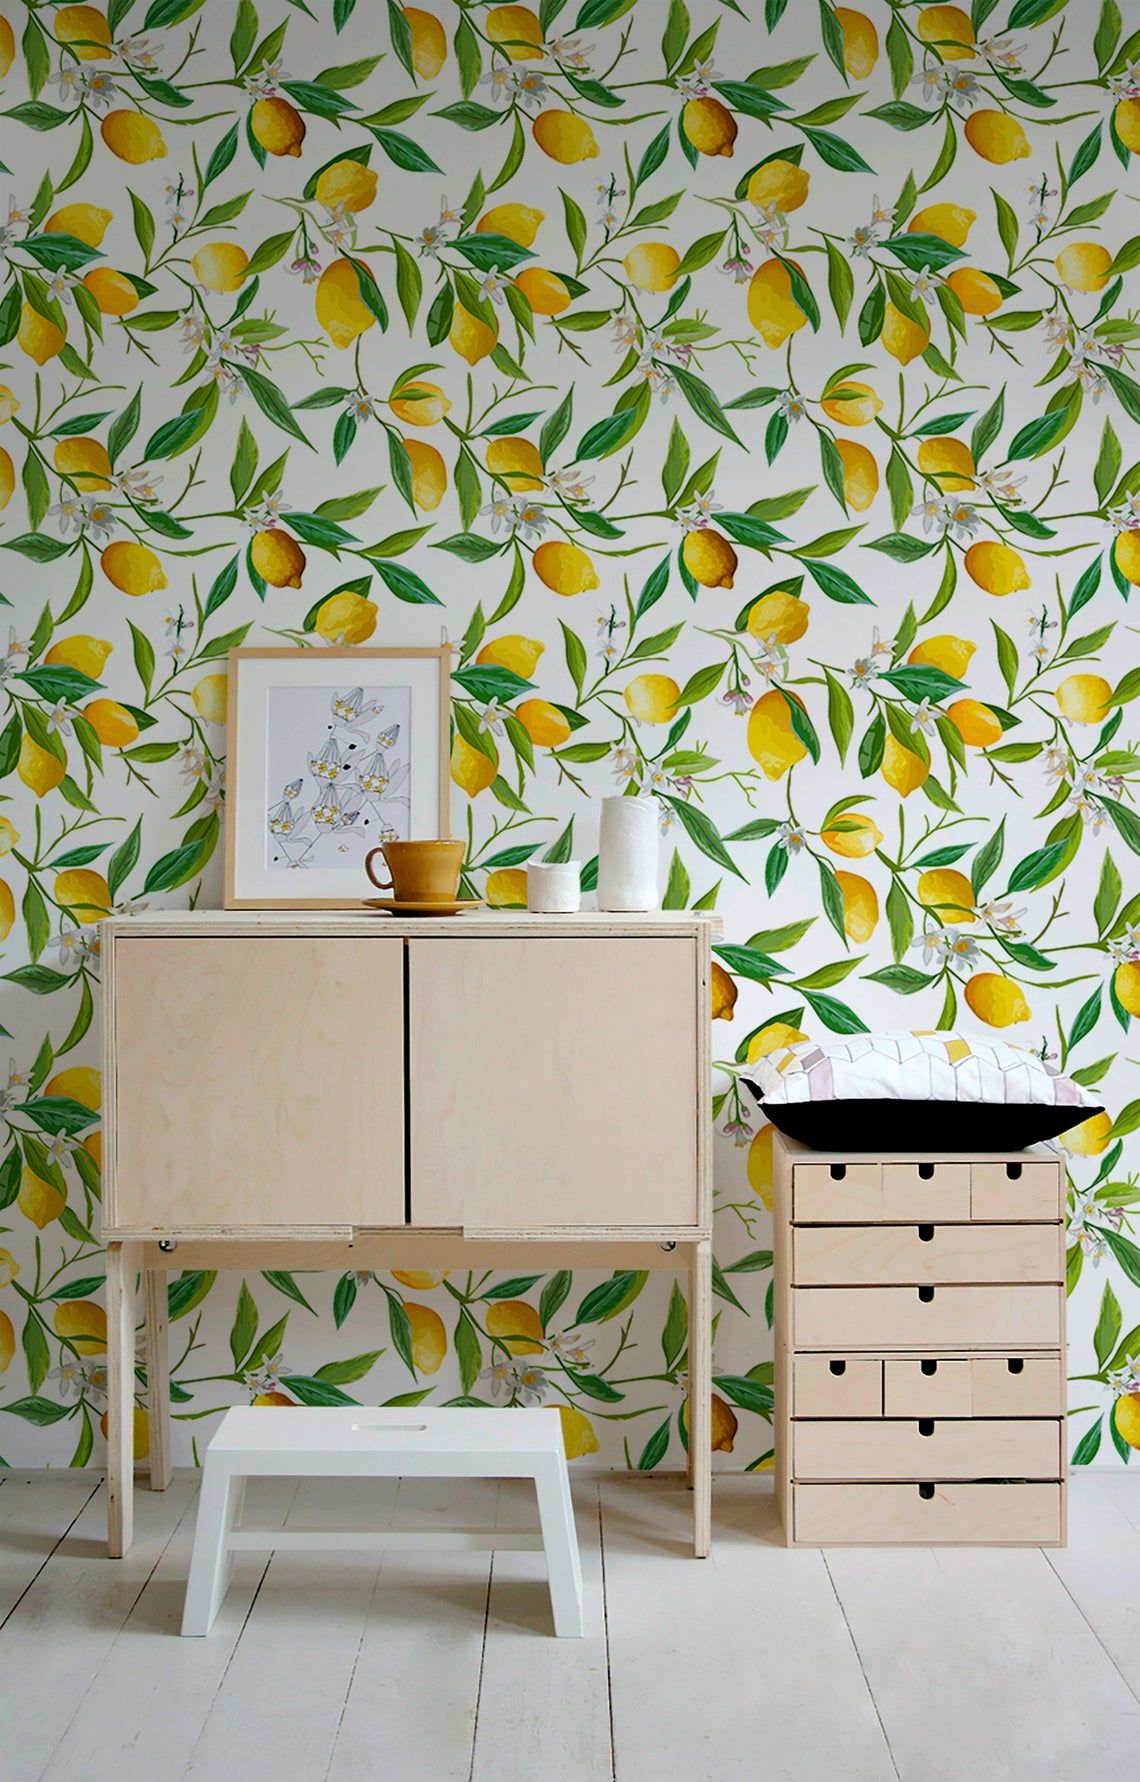 Sunny Removable Wallpaper Patterns for a Fast Summer Room Refresh